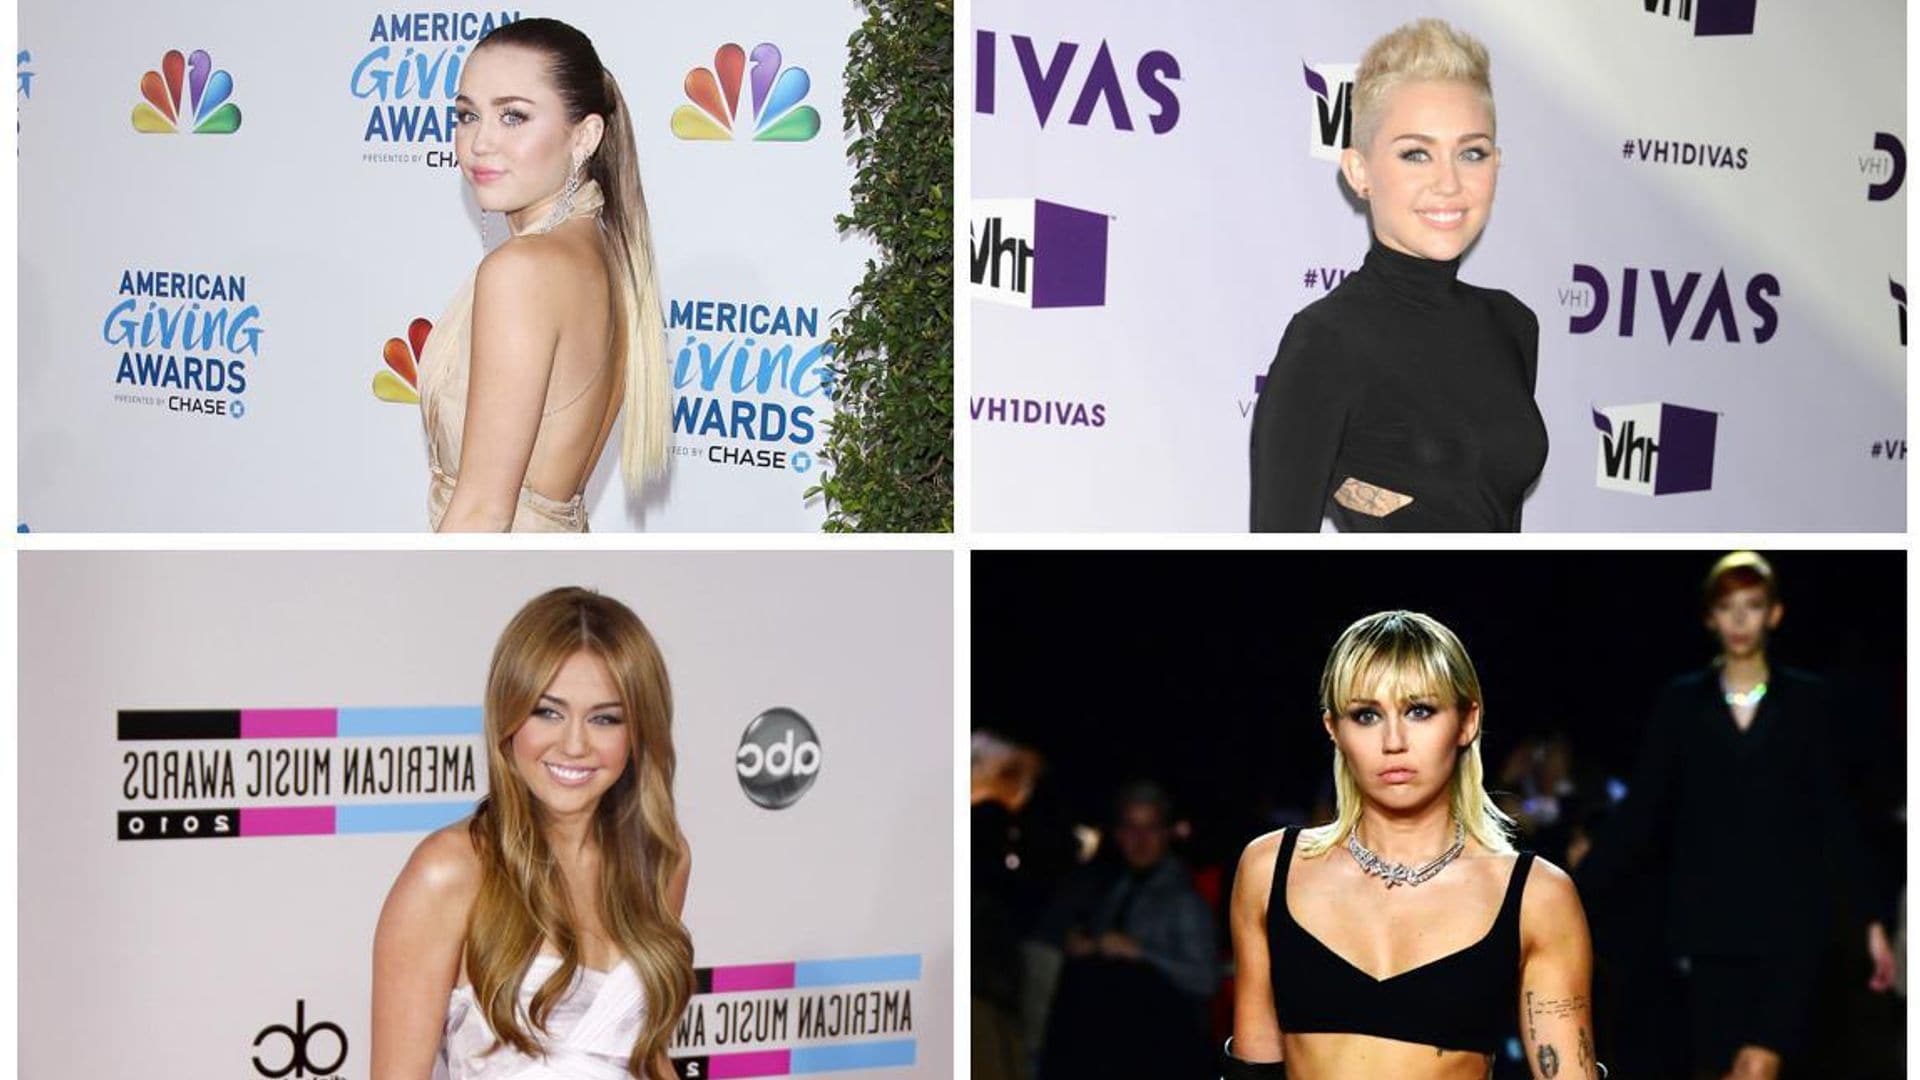 Miley Cyrus’ hairstyles through the years